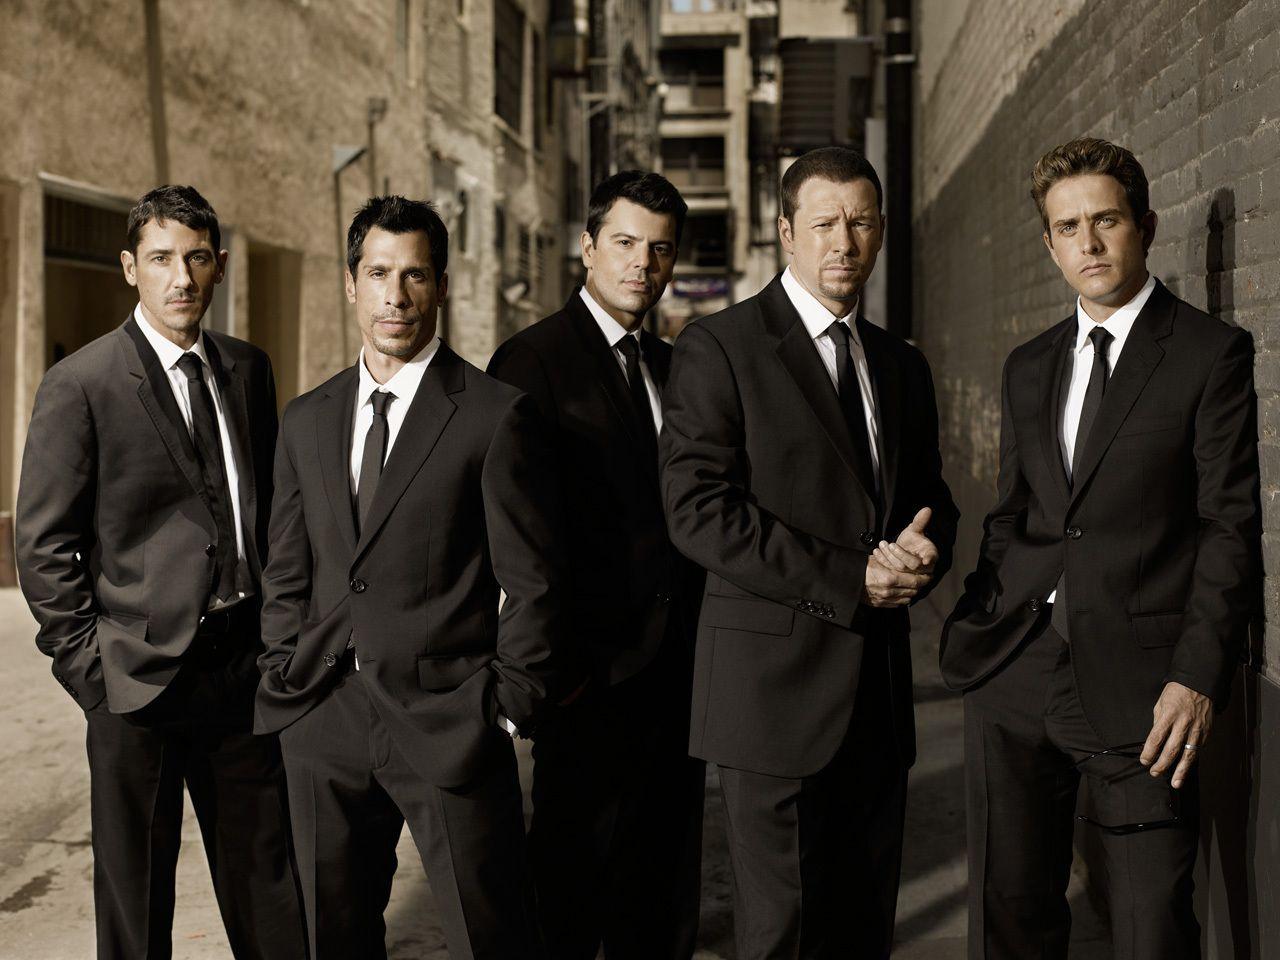 New Kids on the Block image nkotb HD wallpaper and background